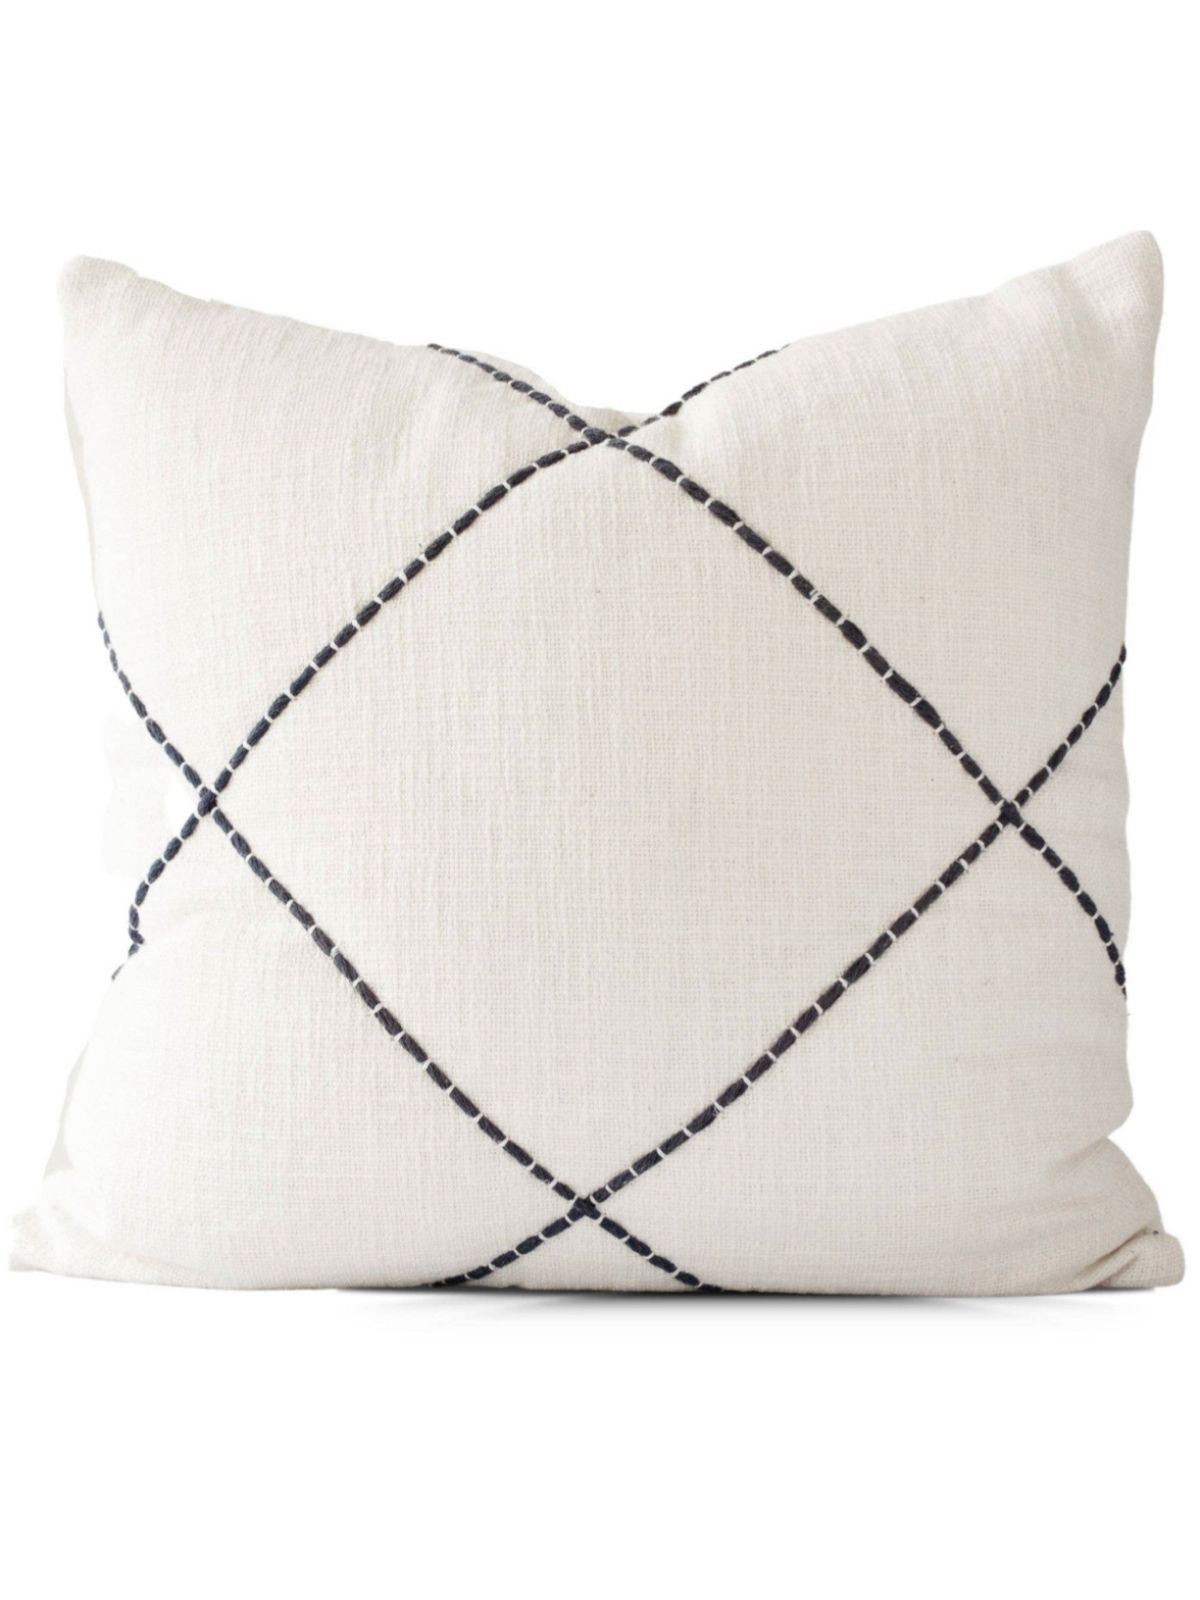 The Claro Criss Cross Embroidered 22x22 Pillow Cover has a clean, crisp 100% cotton texture and embroidered criss cross pattern making perfect for any space. Available in 2 Colors Sold by KYA Home Decor   